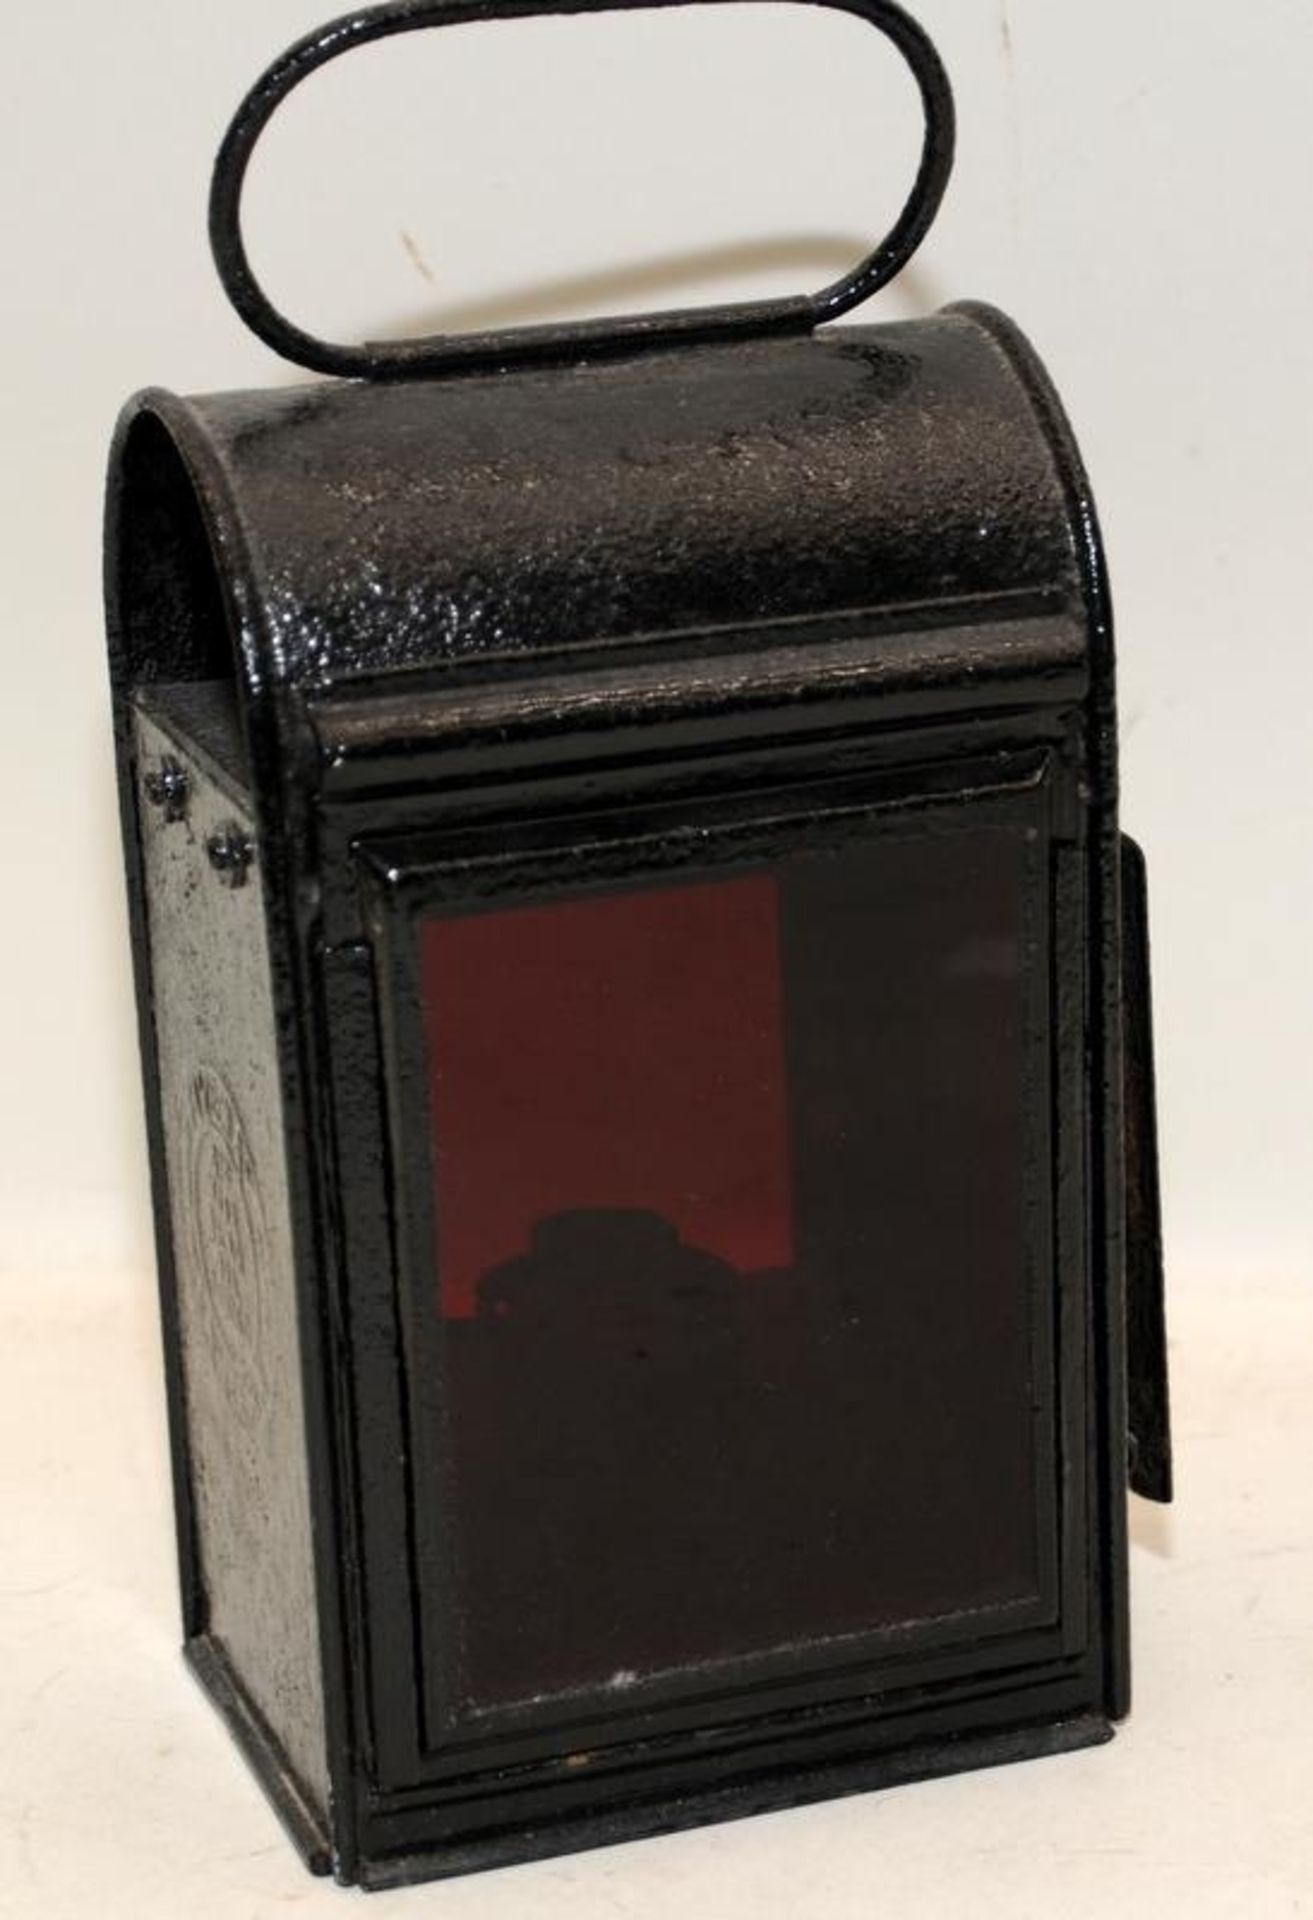 Vintage parrafin/oil carriage lantern, red stop/clear go. 24cms tall including carry handle - Image 2 of 3